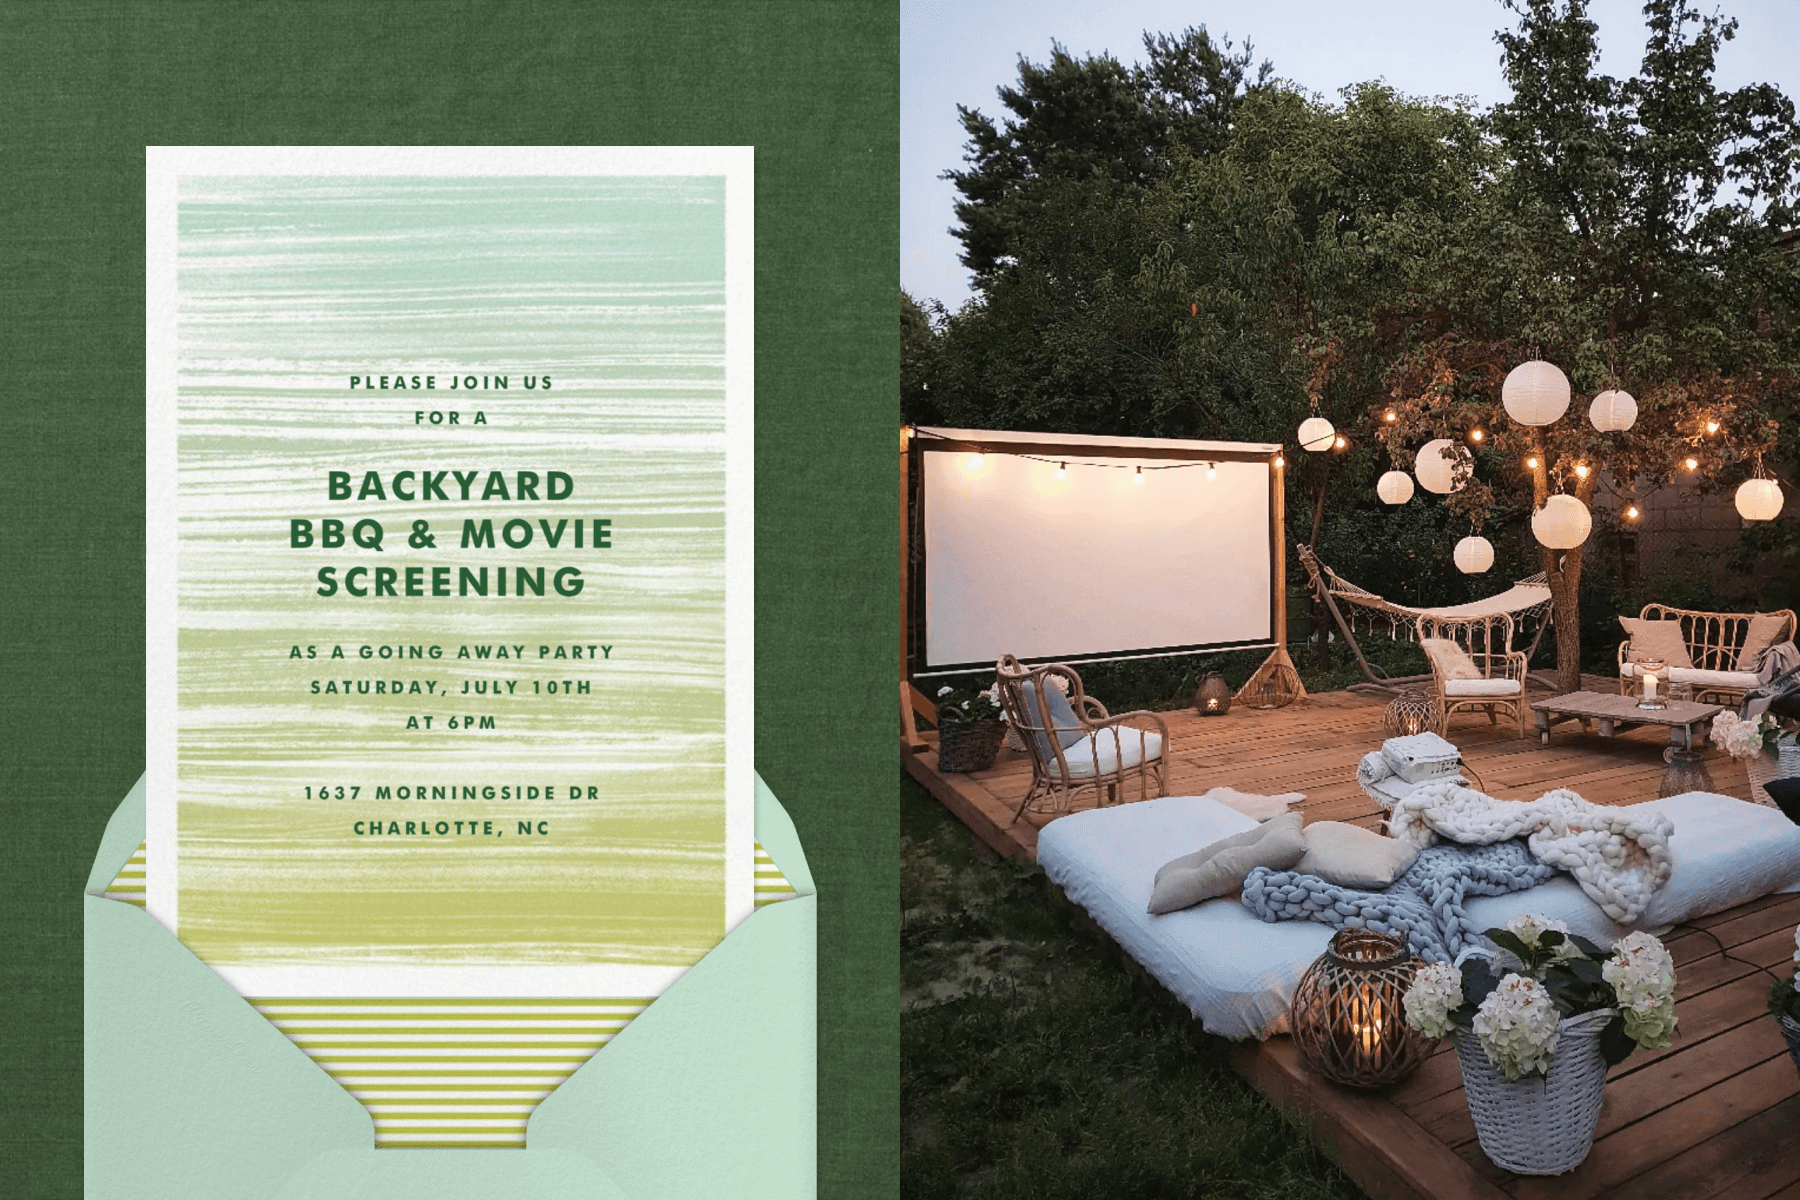 Left: An invitation for a backyard BBQ & movie screening with abstract green brushstroke stripes in an ombre pattern on a darker green background. Right: A cozy setup for an outdoor movie with a projector screen and white paper lanterns on a wooden deck.